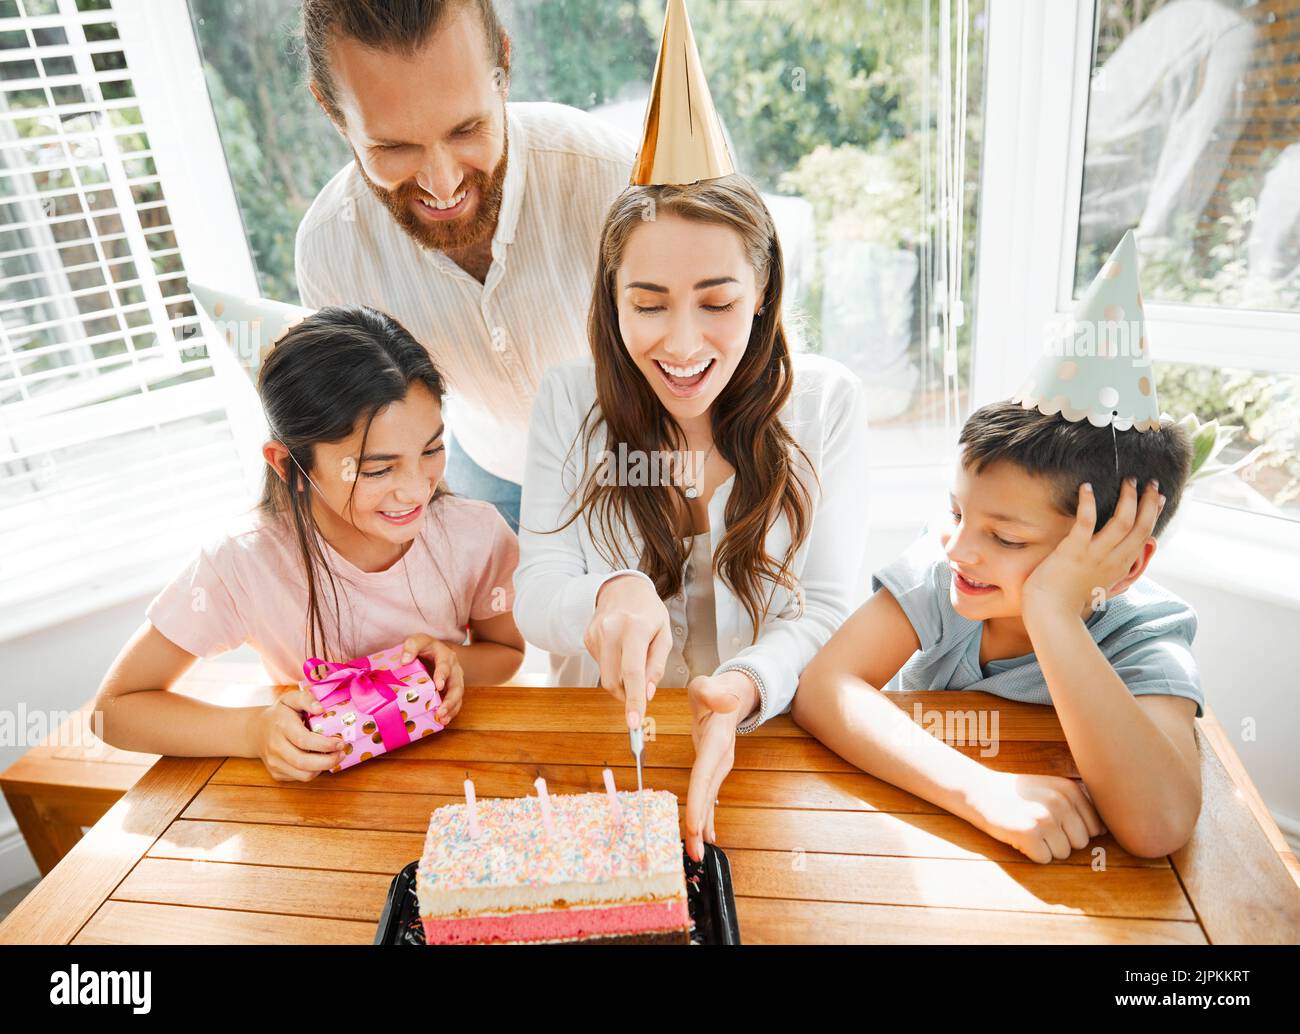 Birthday, cake and celebration with a family celebrating a mother on a special day. Cutting the dessert, having a party and spending time together Stock Photo